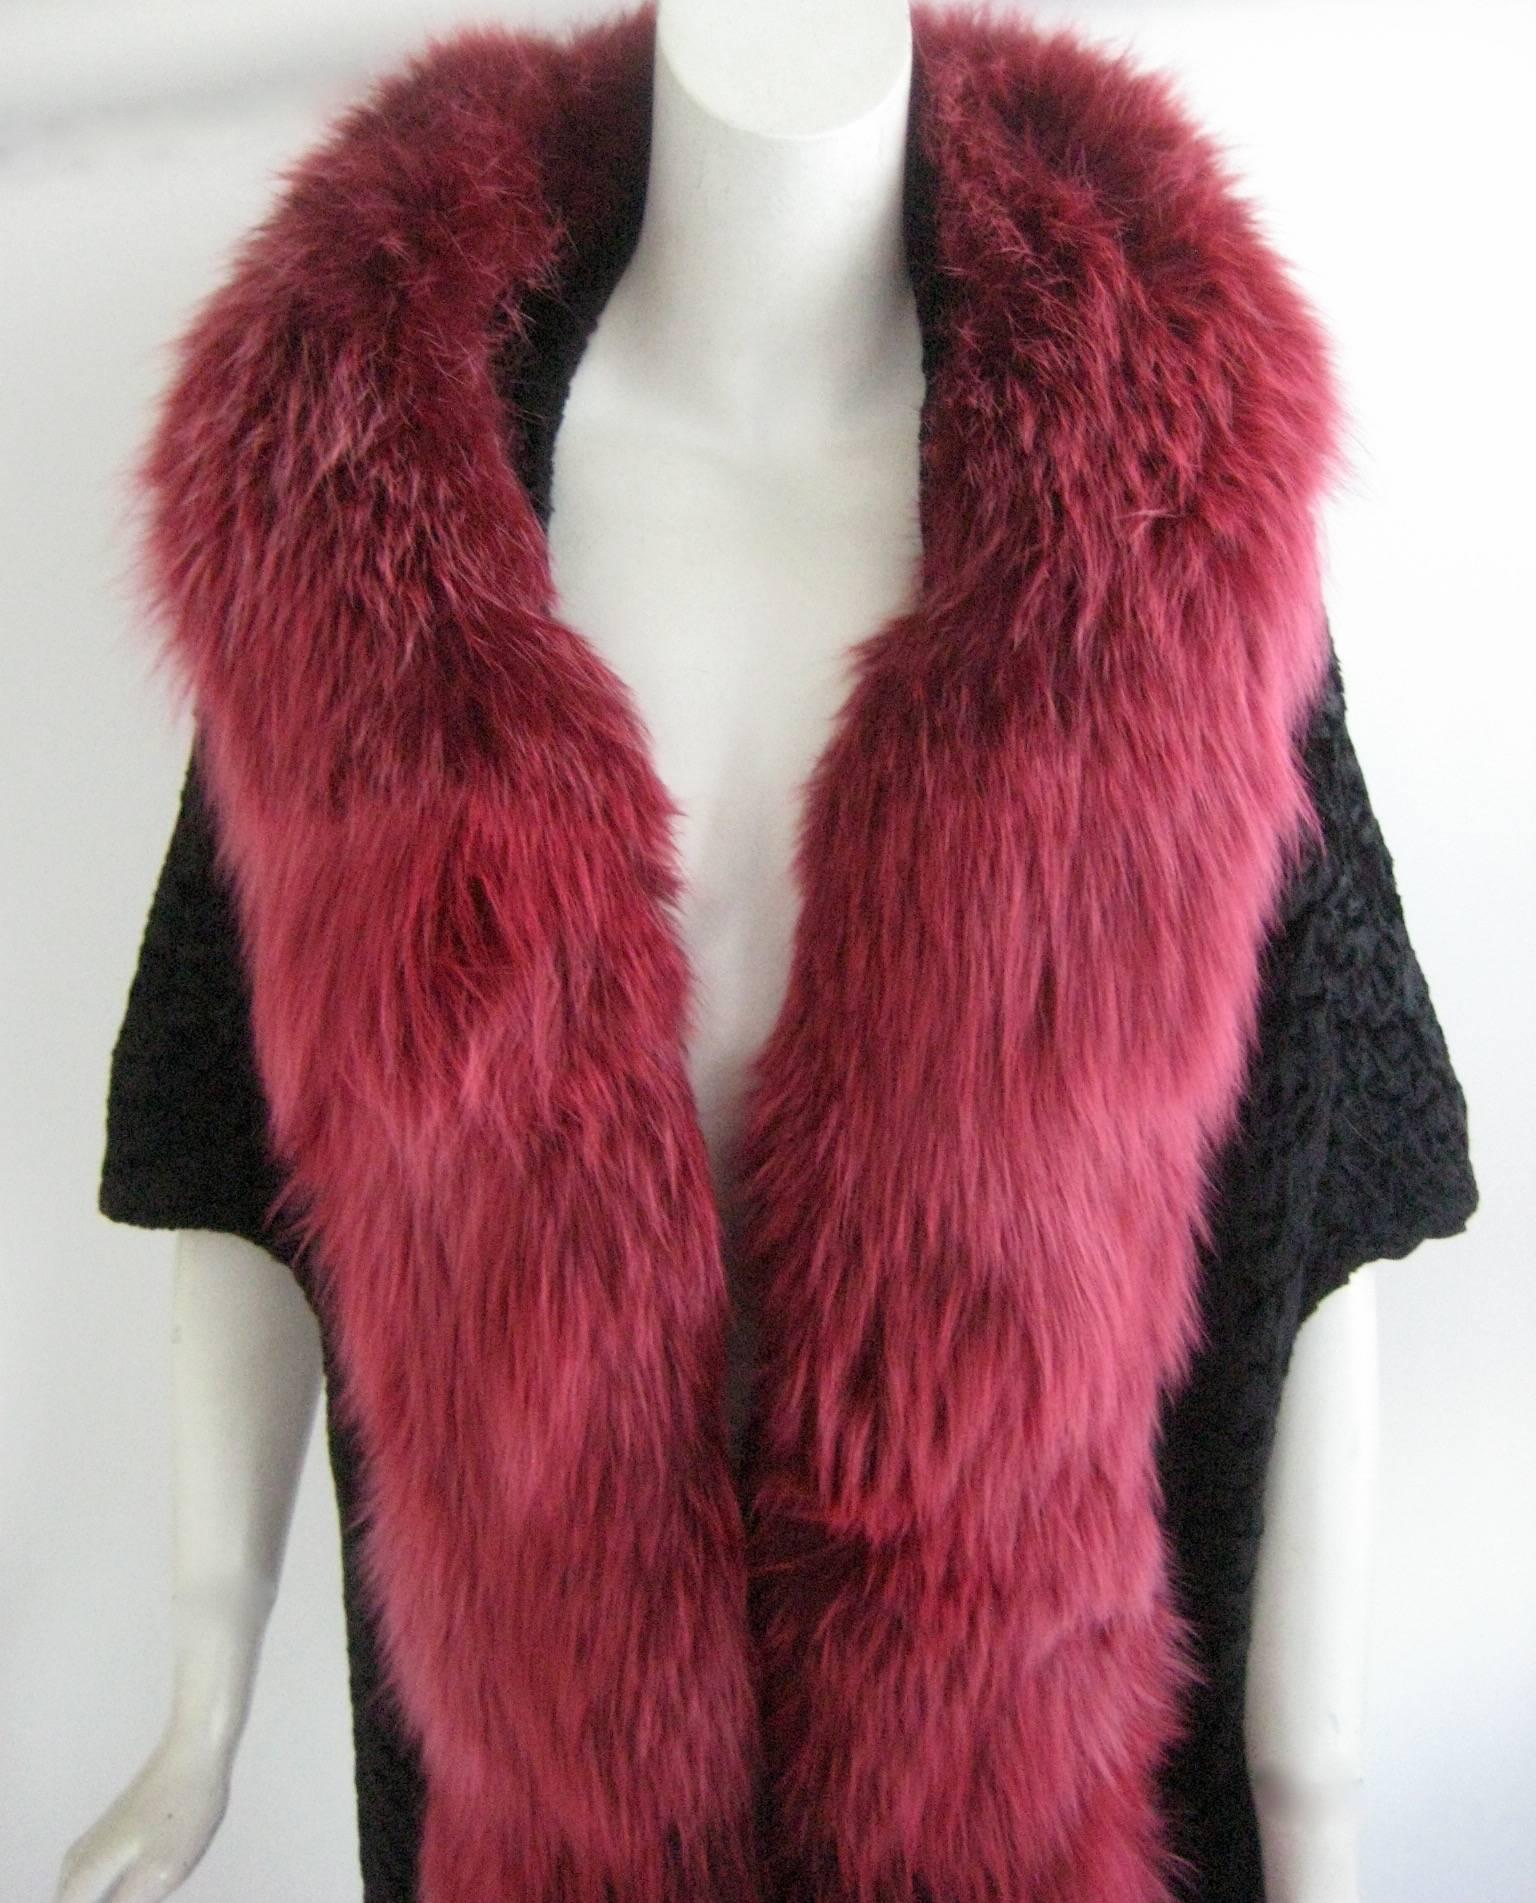 Gorgeous broadtail cape let shrug 
Lined in black silk 
Trimmed in dyed pink fox 
Excellent condition